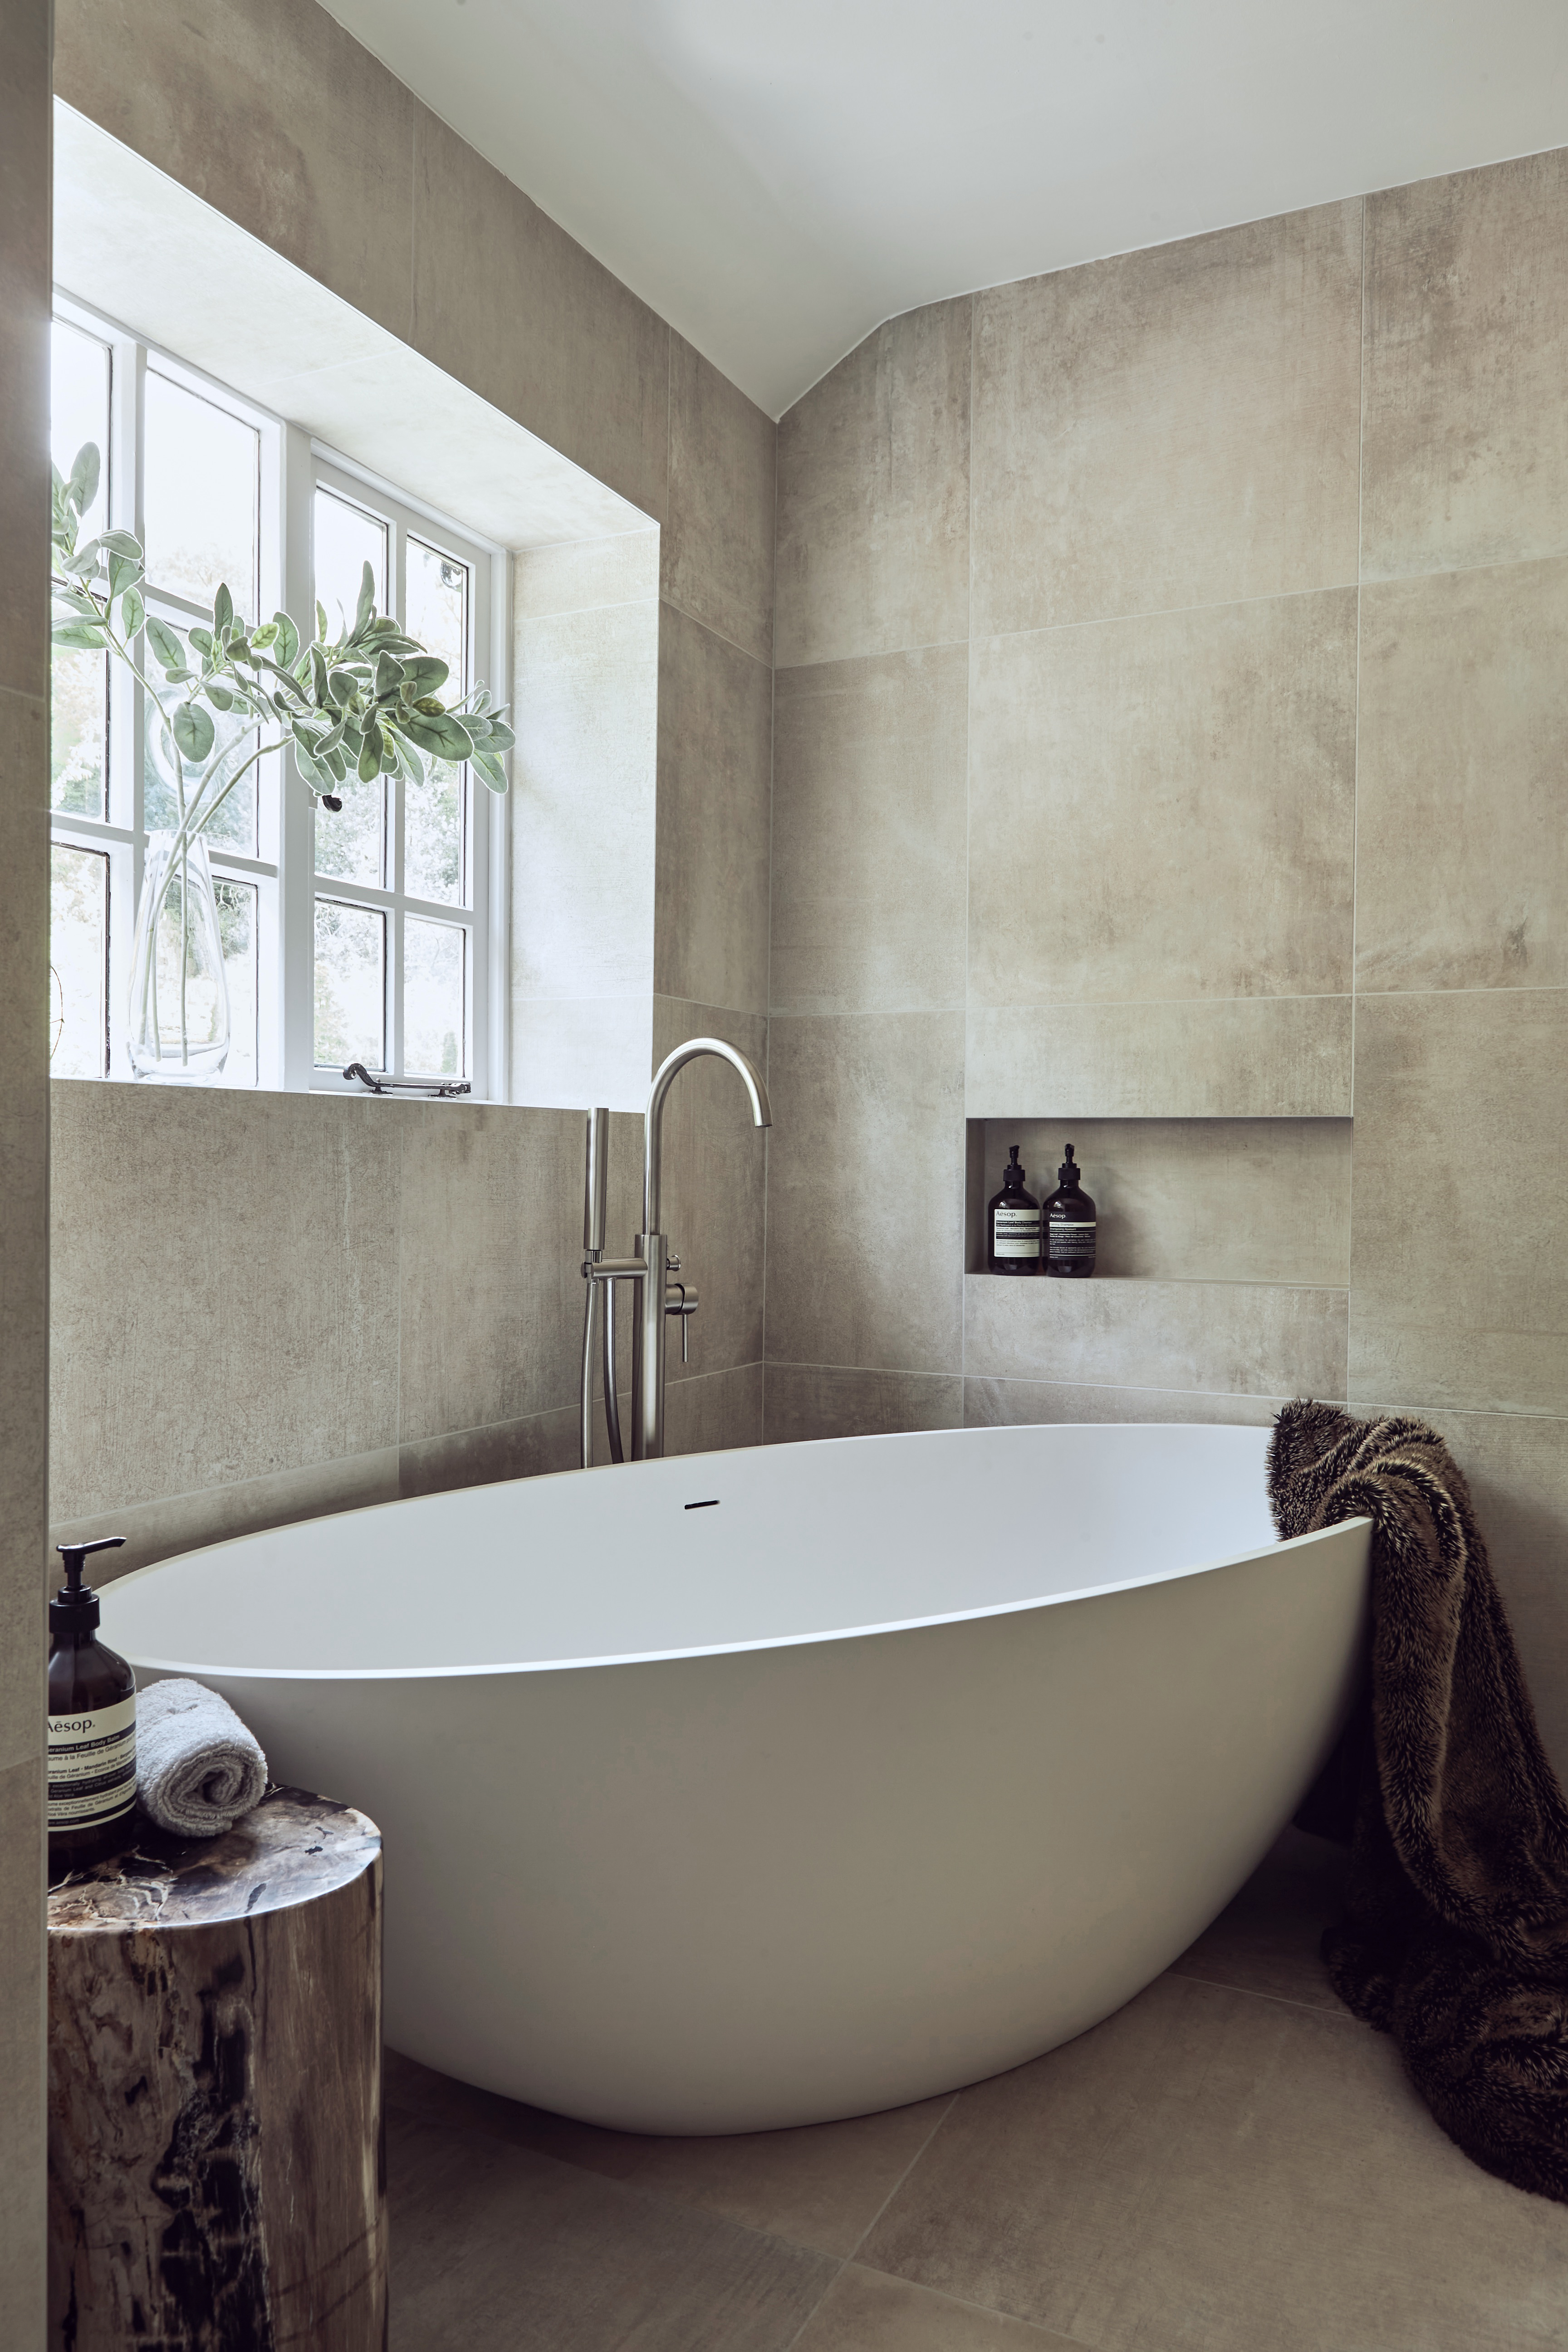  Large freestanding white bath with floorstanding tap